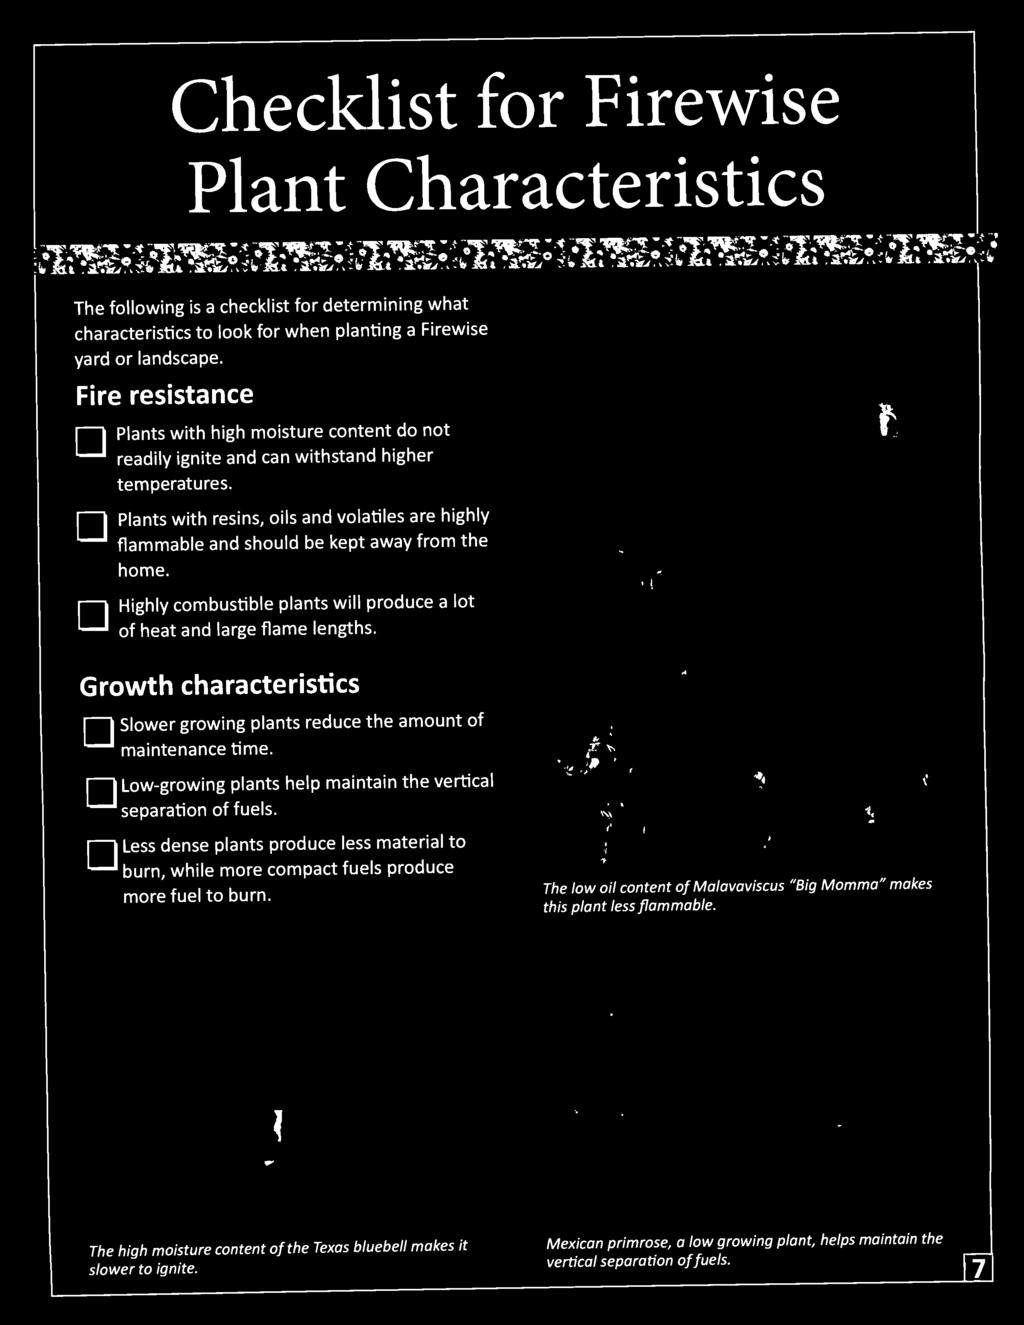 Growth characteristics Slo~er growin~ plants reduce the amount of maintenance time. Low-growing plants help maintain the vertical separation of fuels.